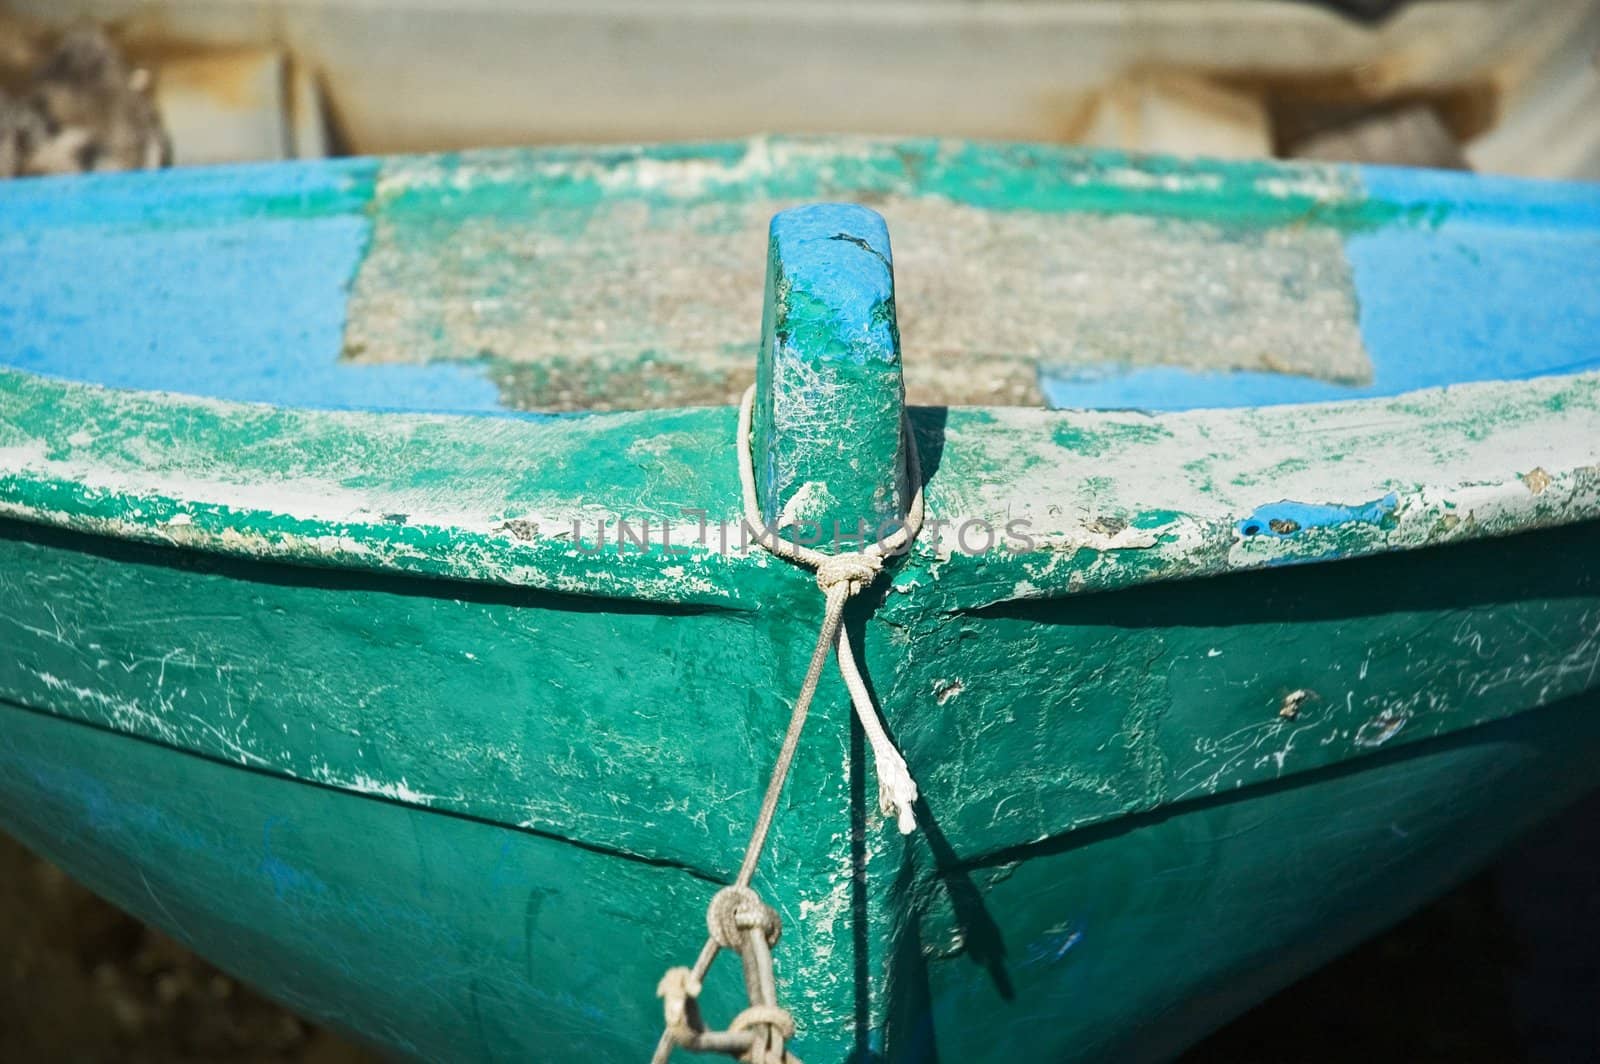 Old boat detail by sil